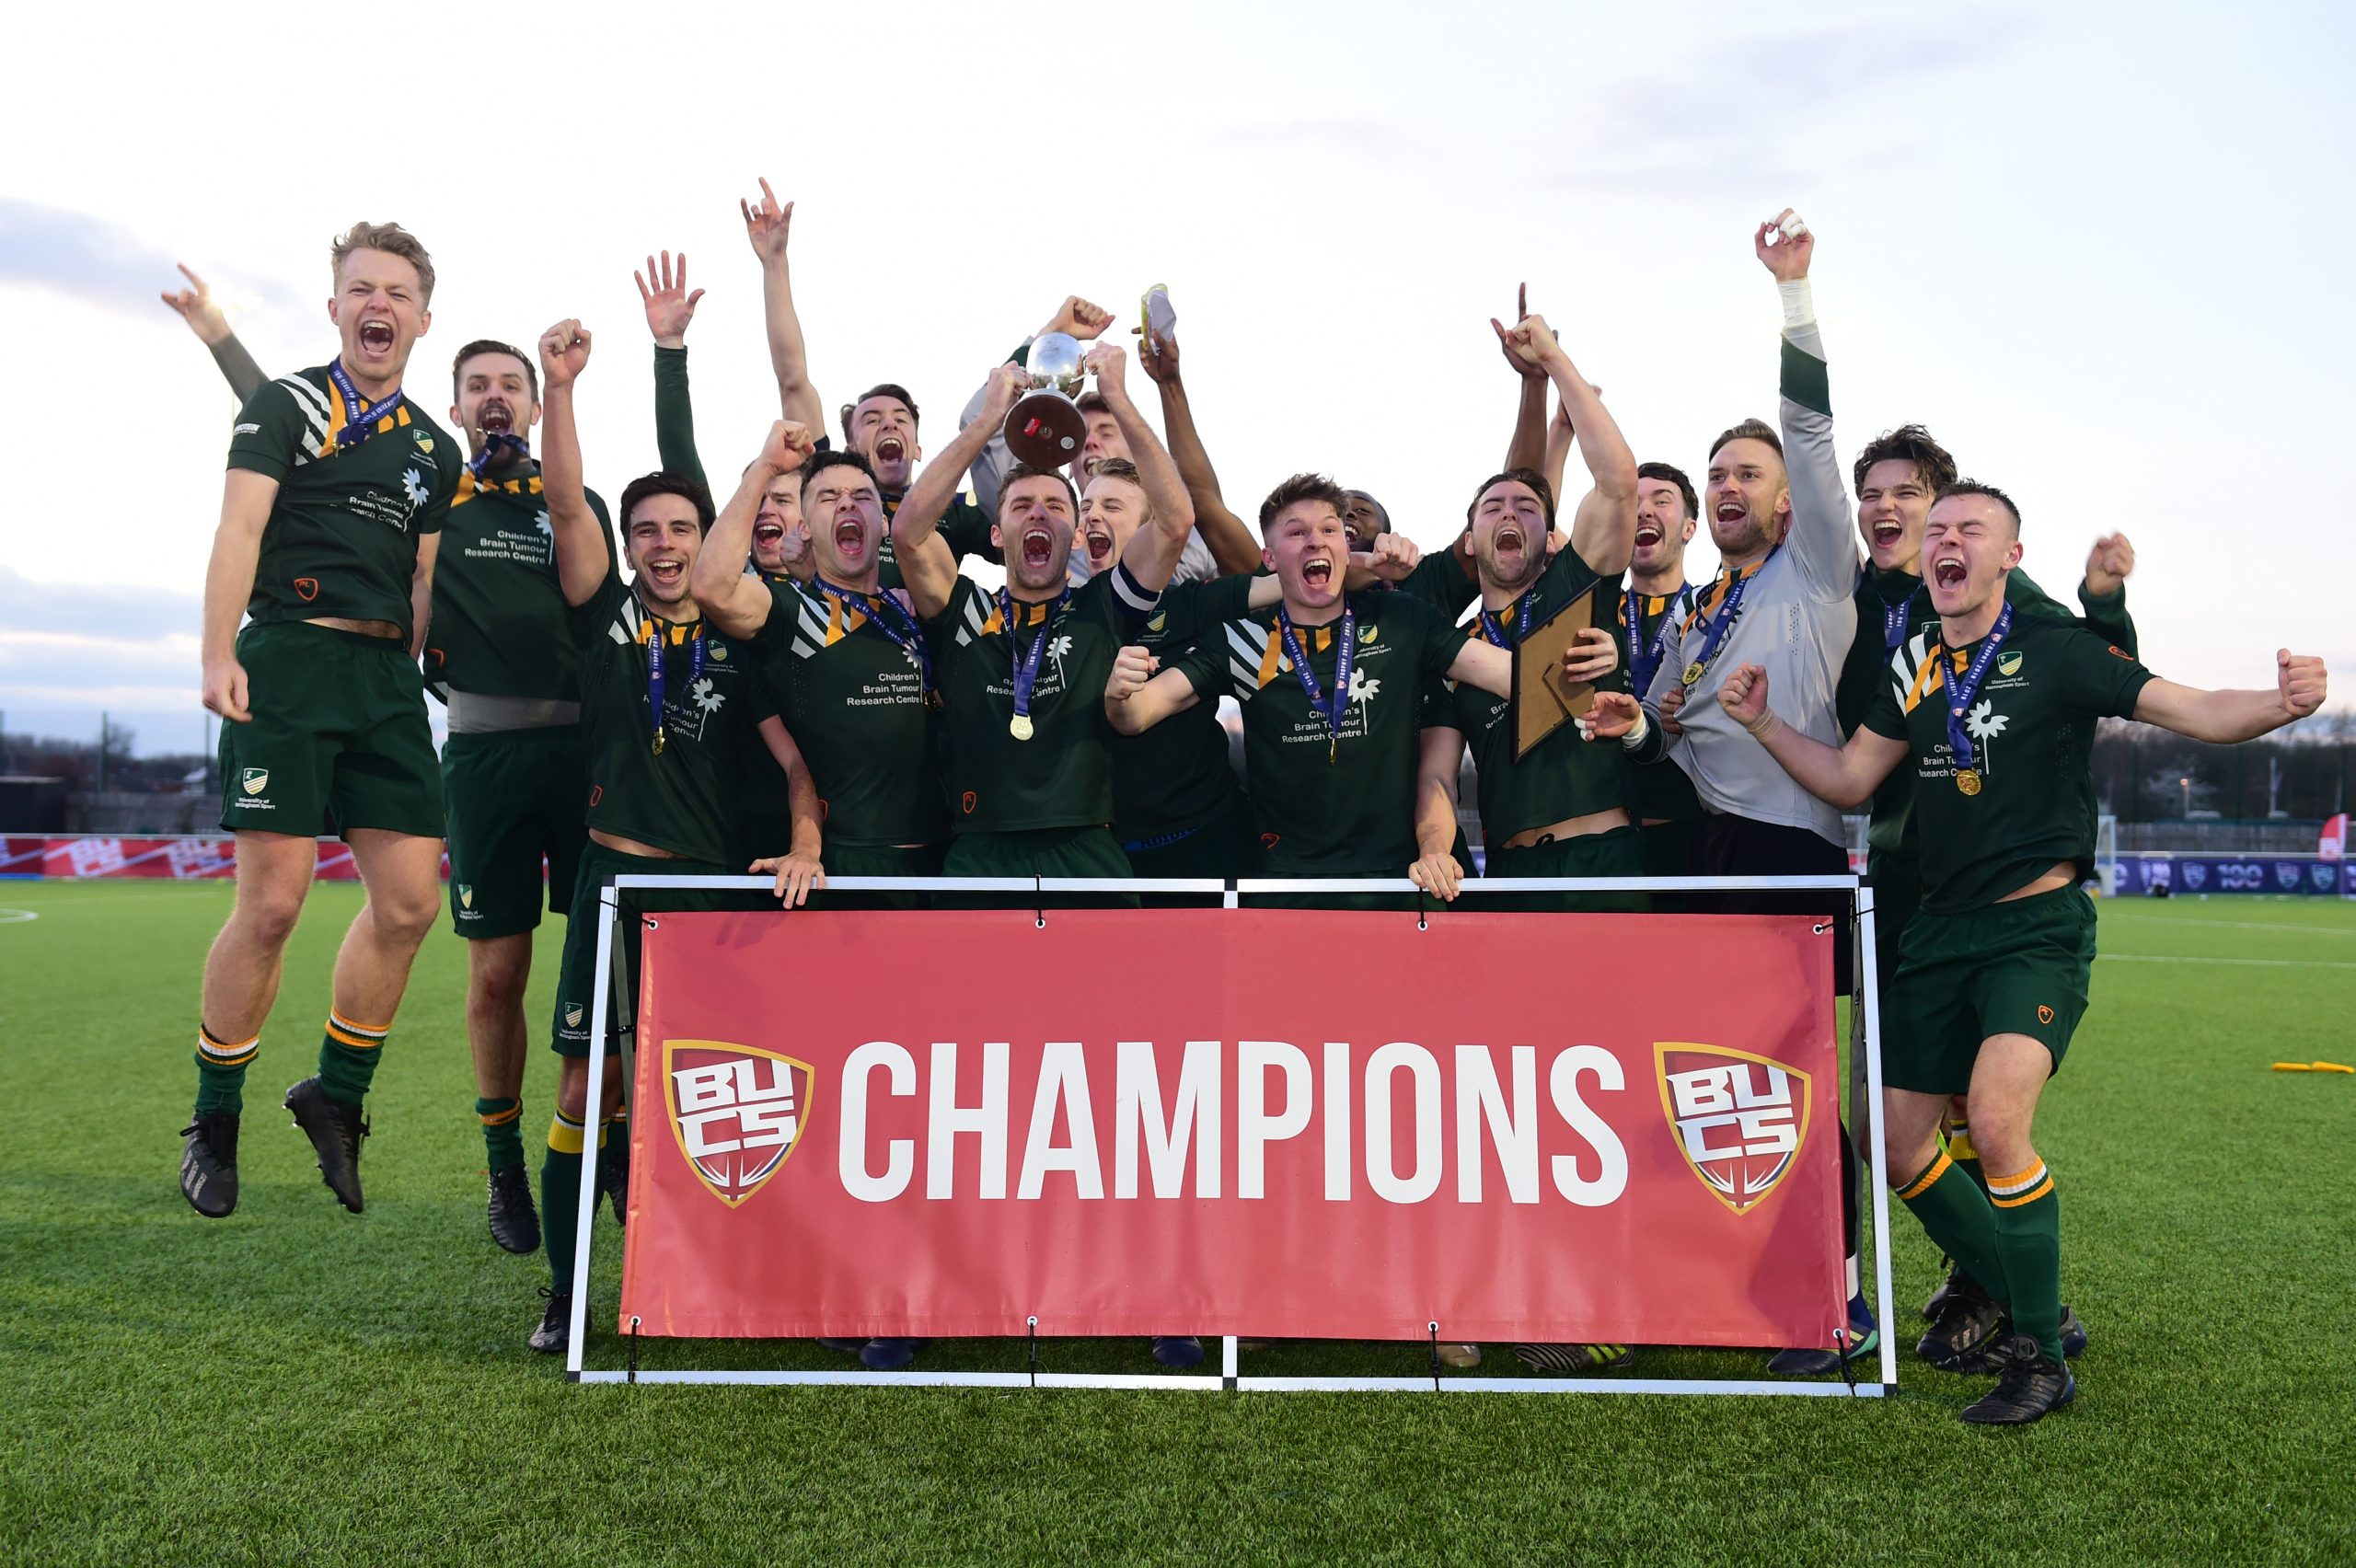 The University of Nottingham Football Club celebrate their BUCS Trophy win in 2018